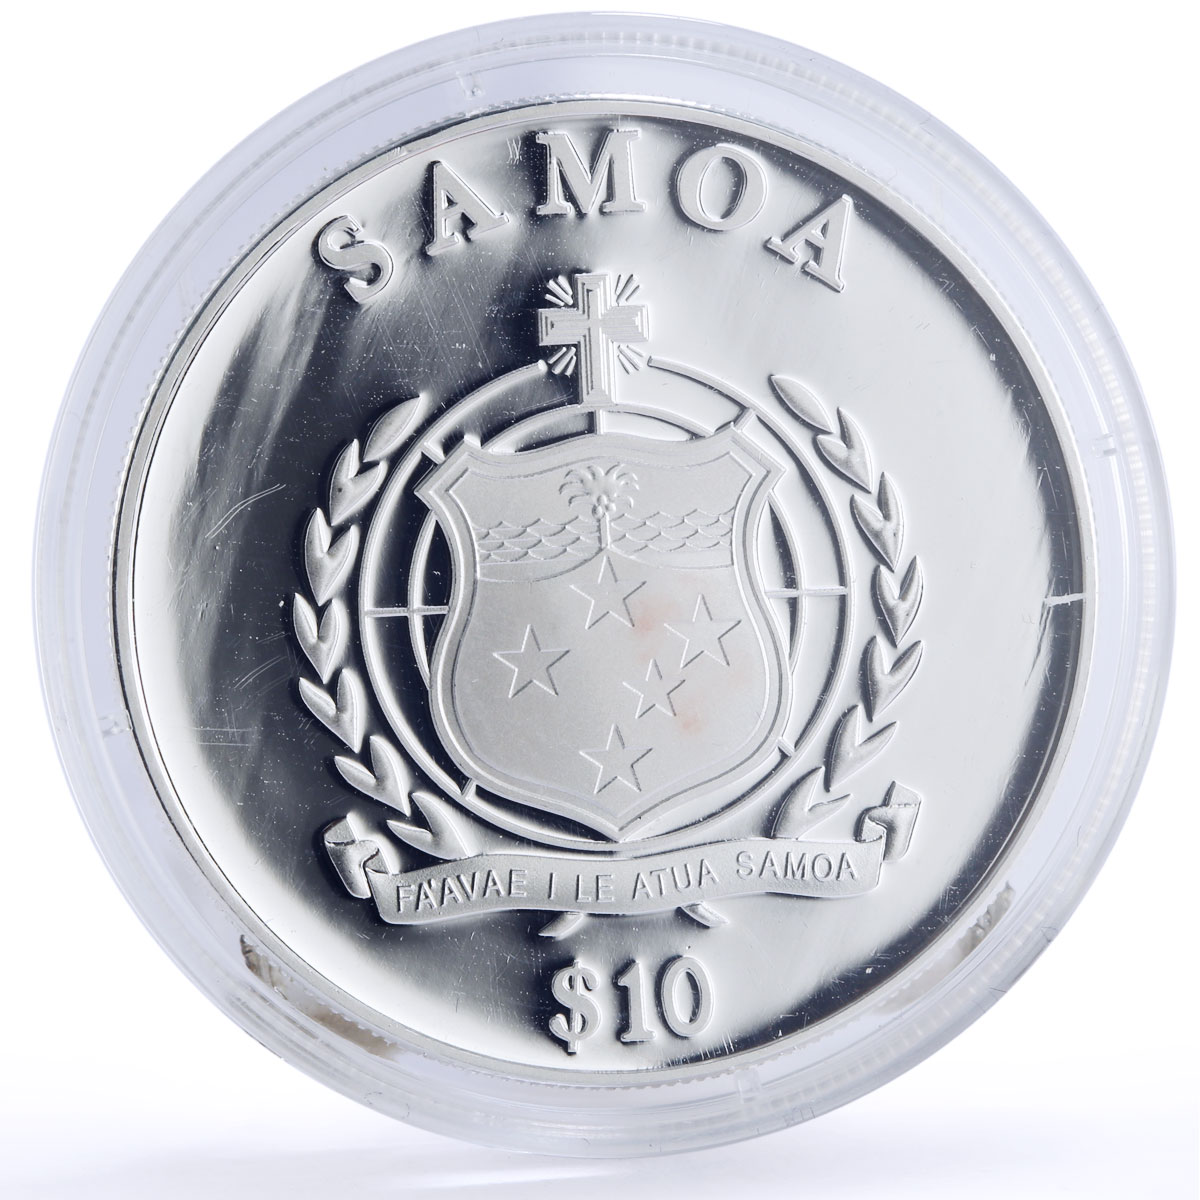 Samoa 10 dollars 2nd Commandment Shall Not Use Gods Name gilded silver coin 2009